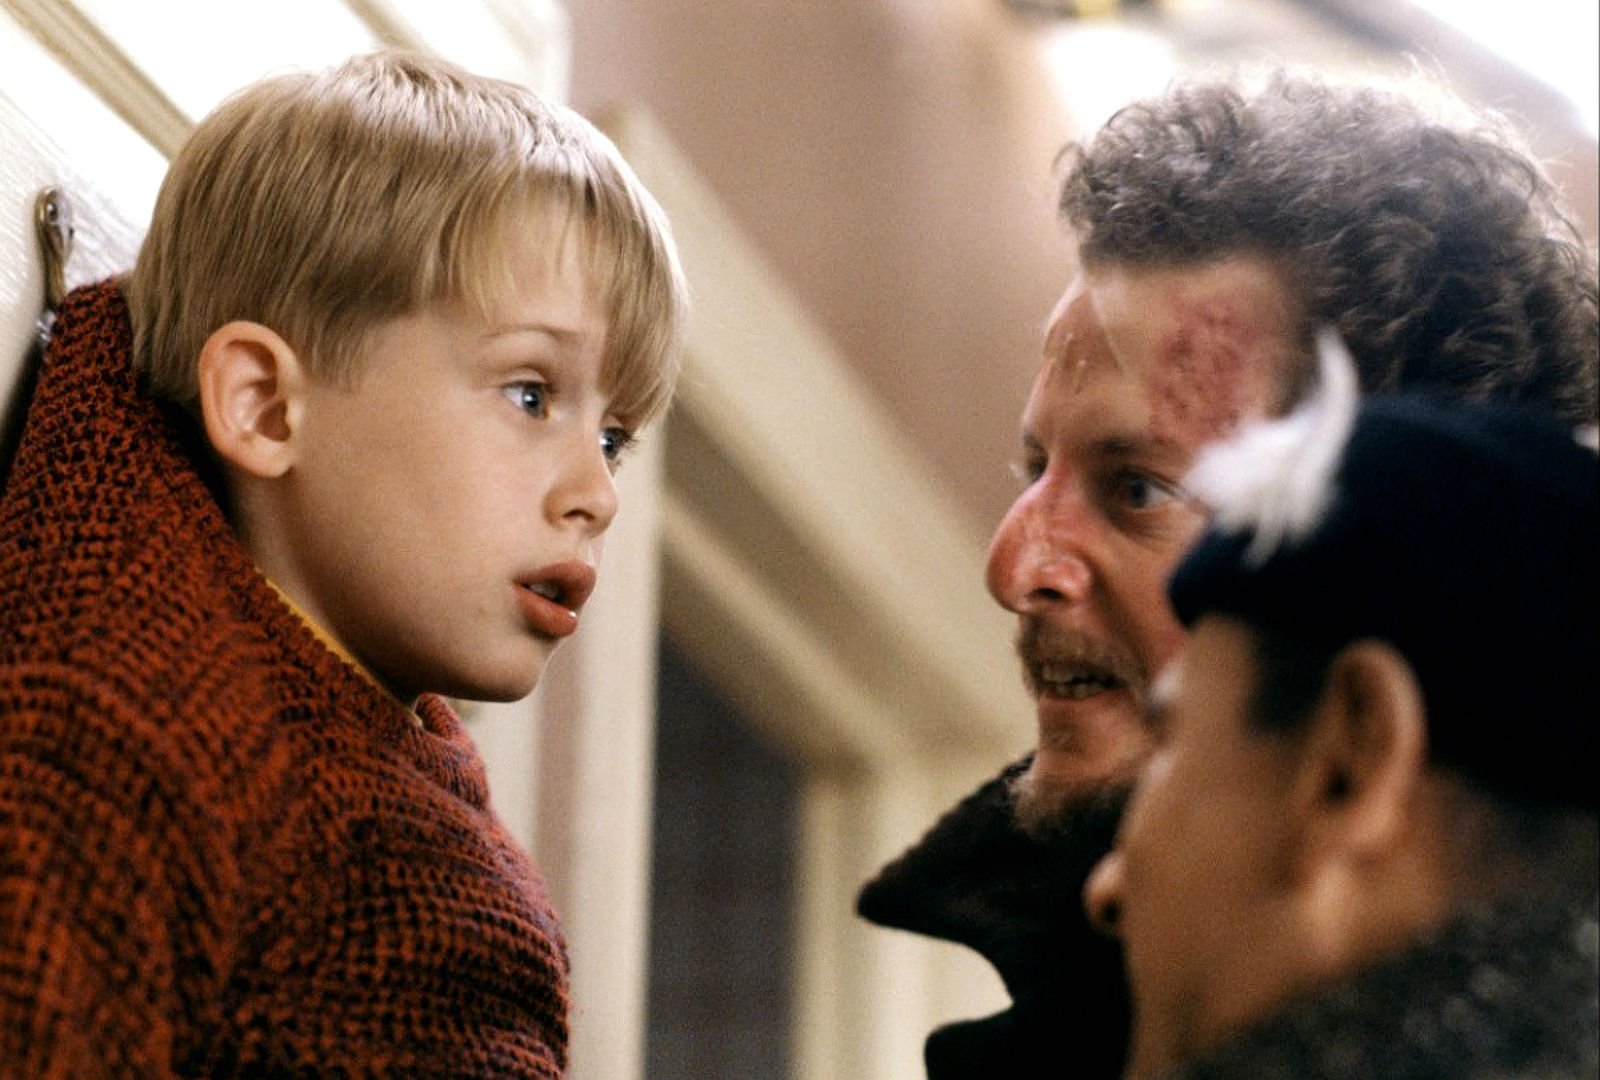 home alone 4 full movie online free